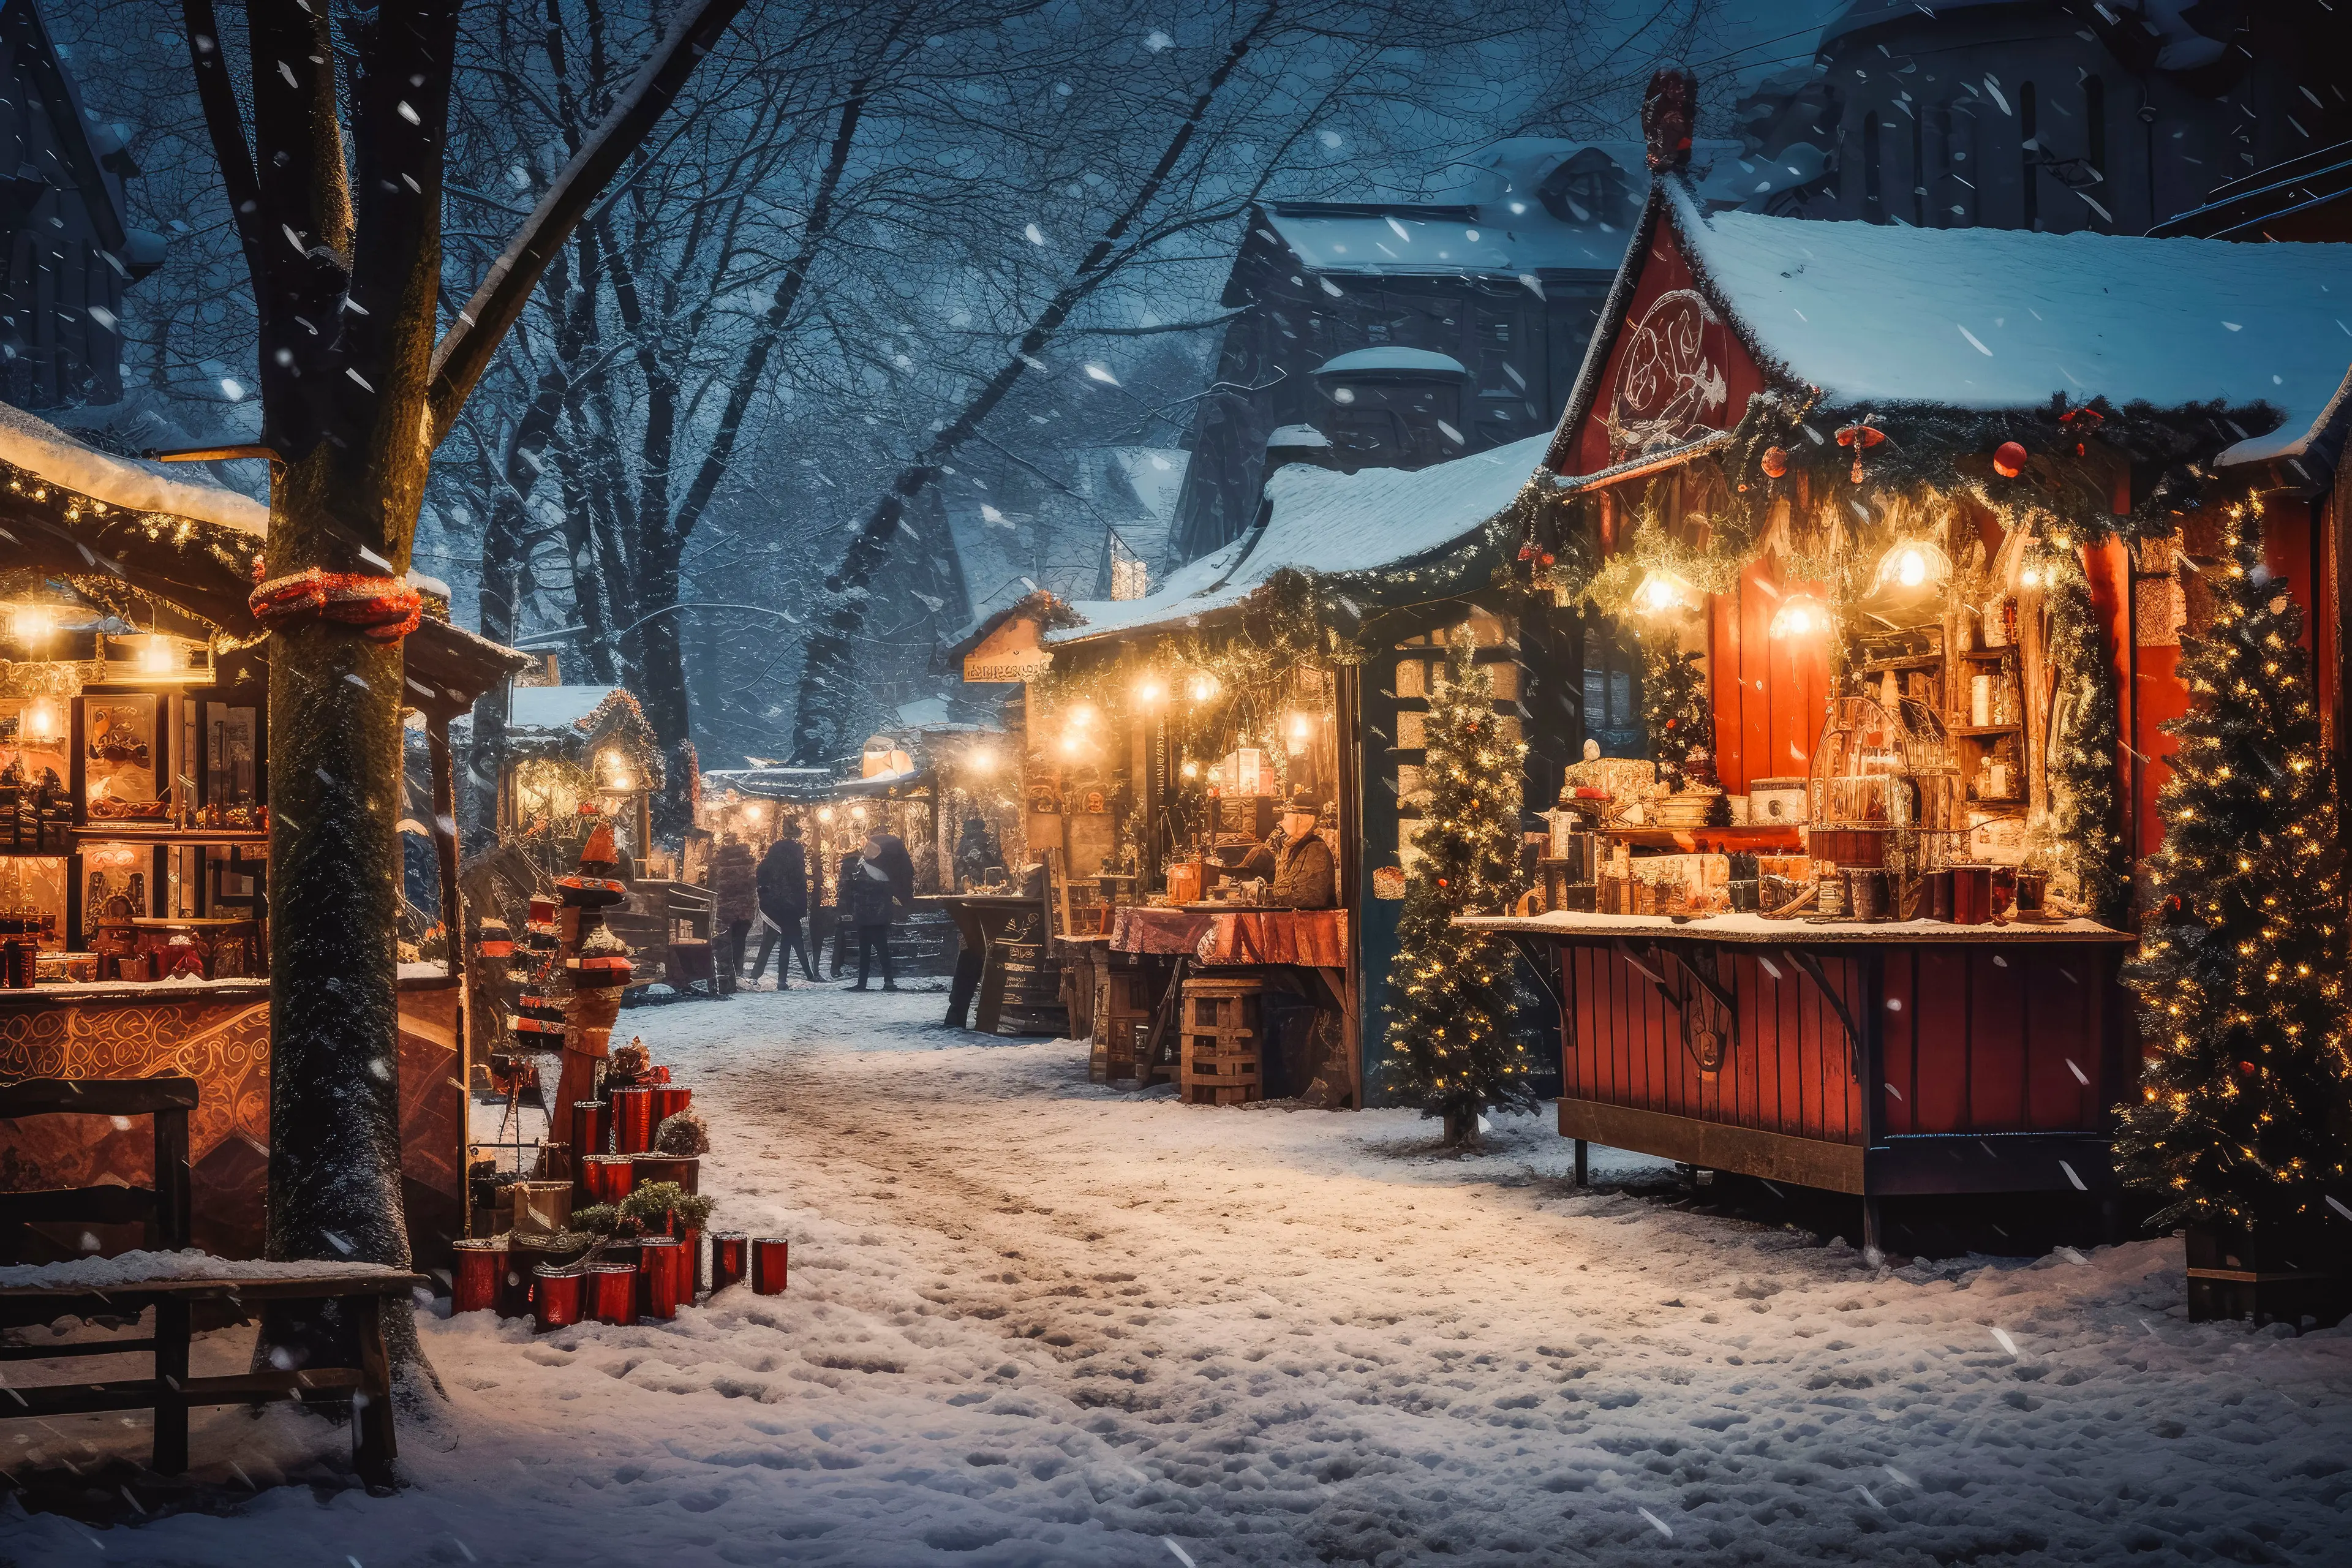 People enjoying a Christmas market in snowy weather